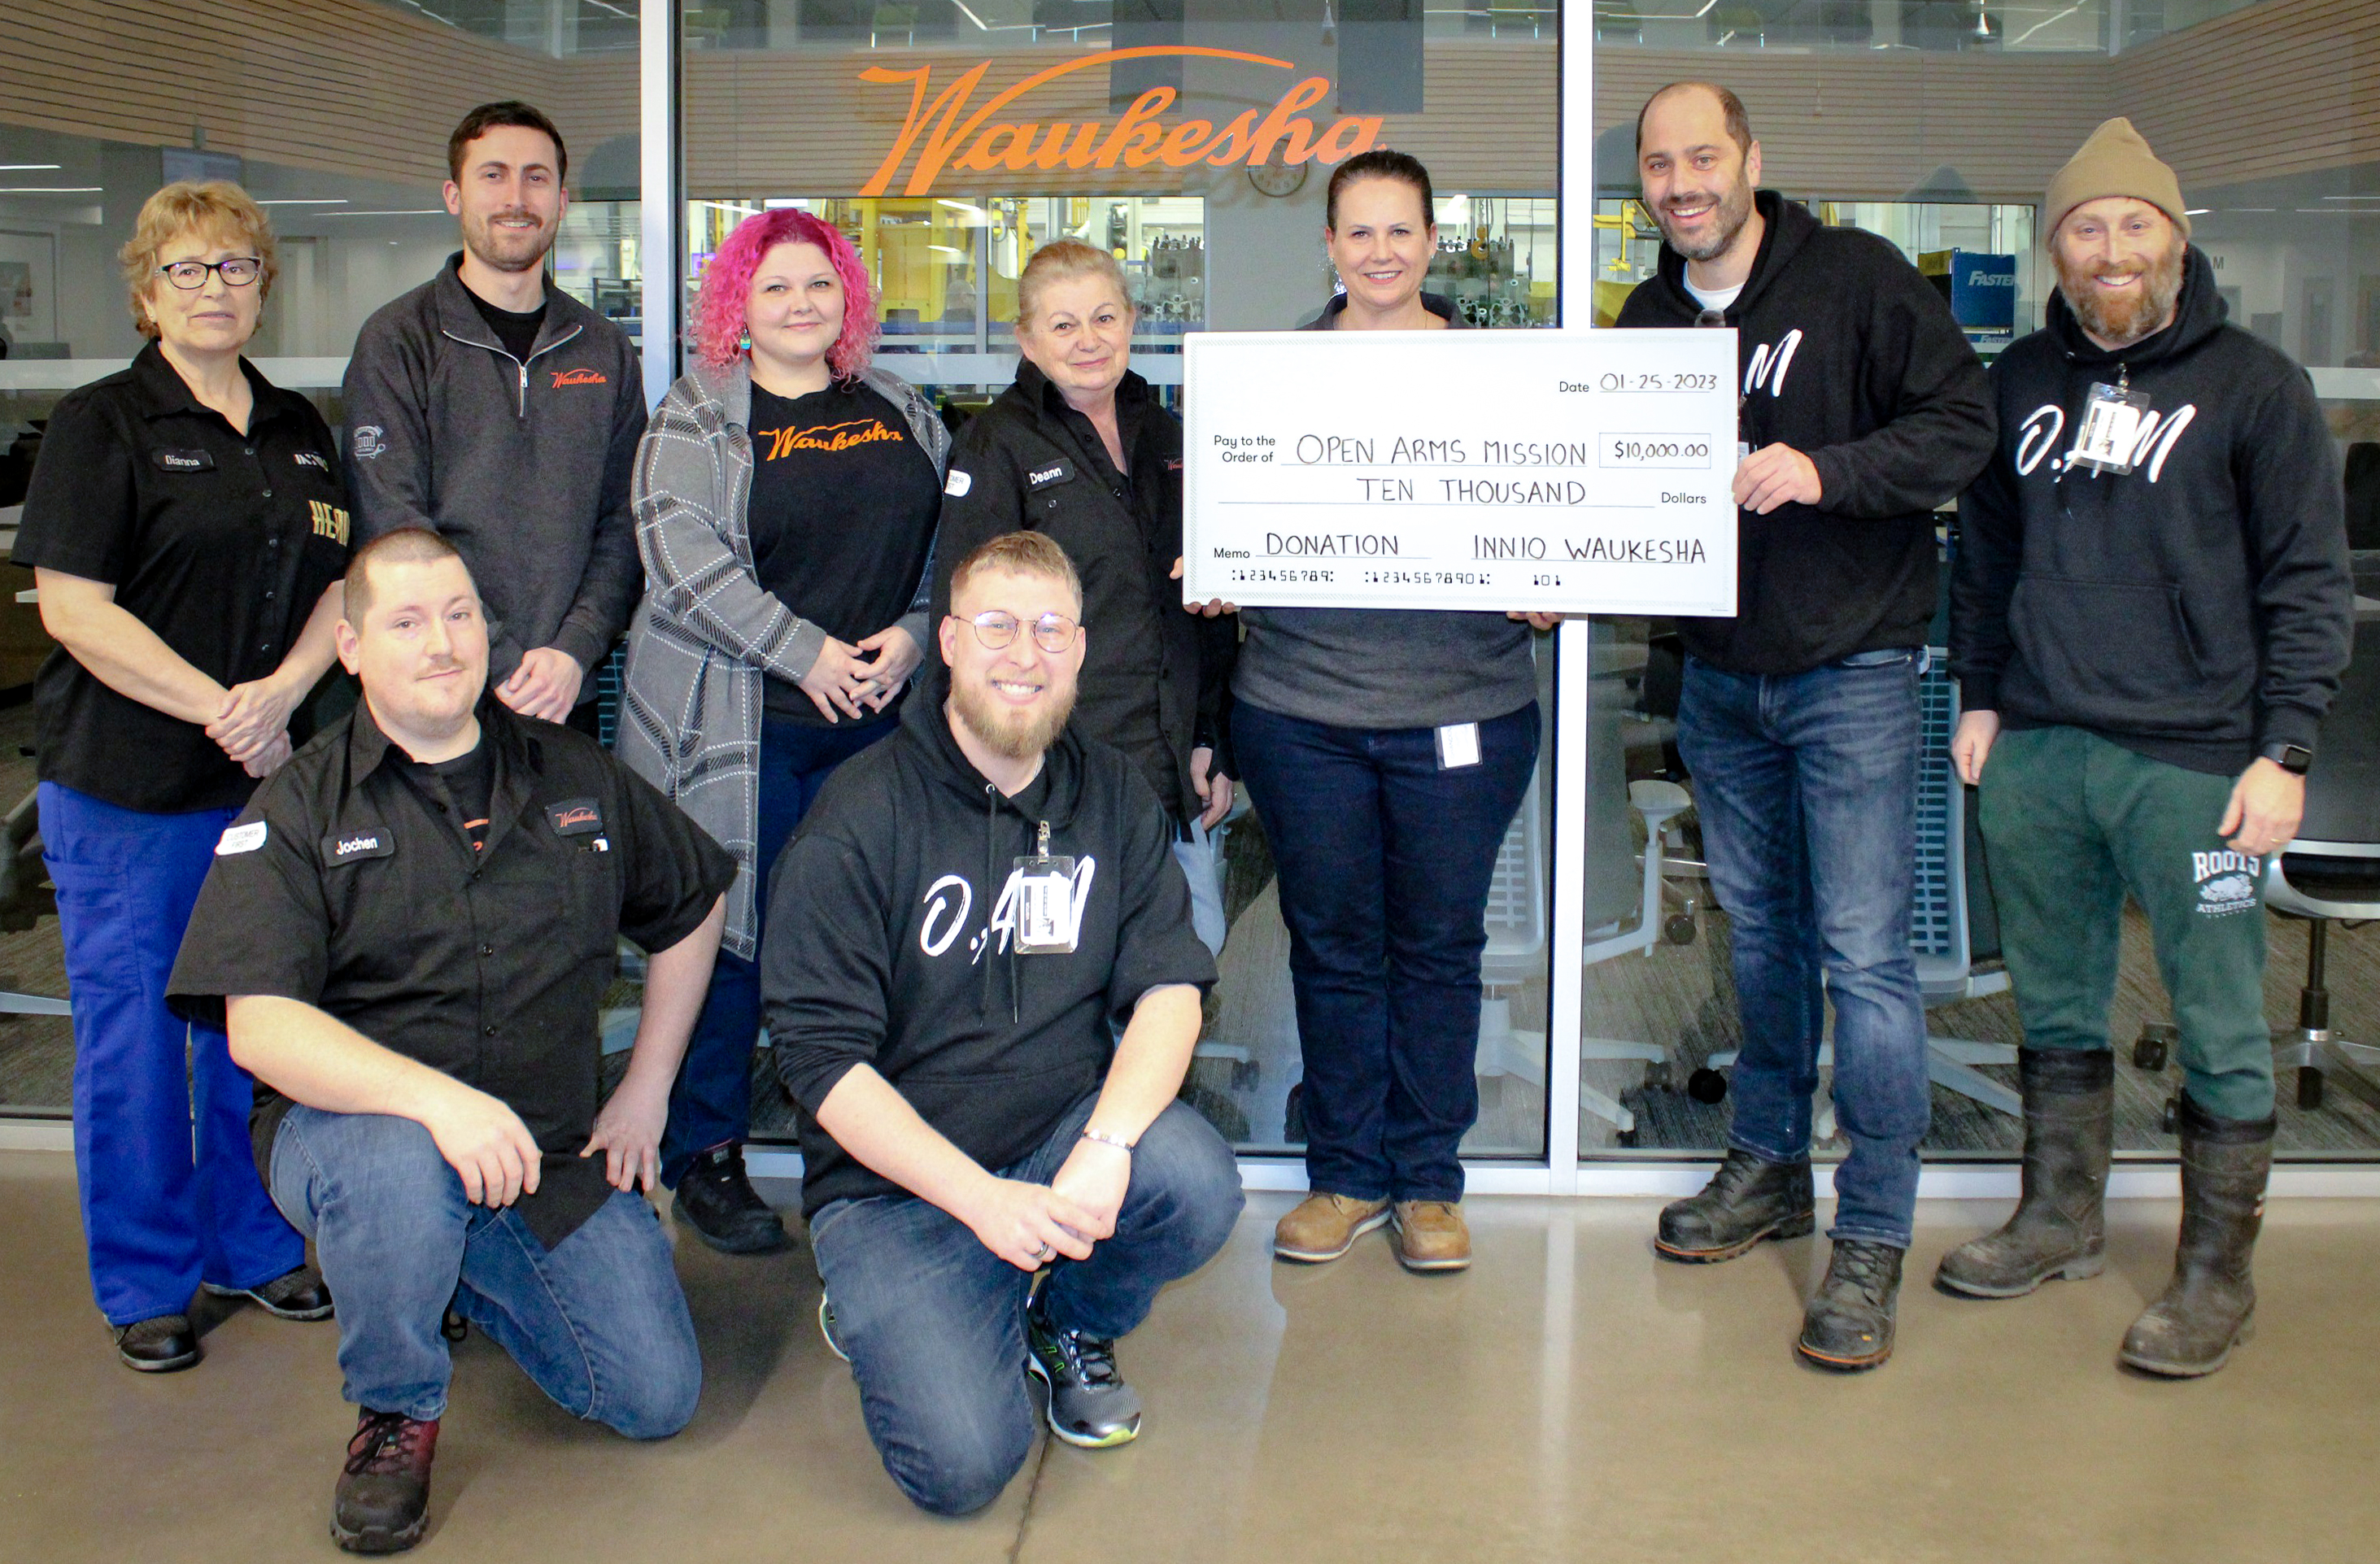 Image for press release - INNIO’s Waukesha brand donates to Welland food bank